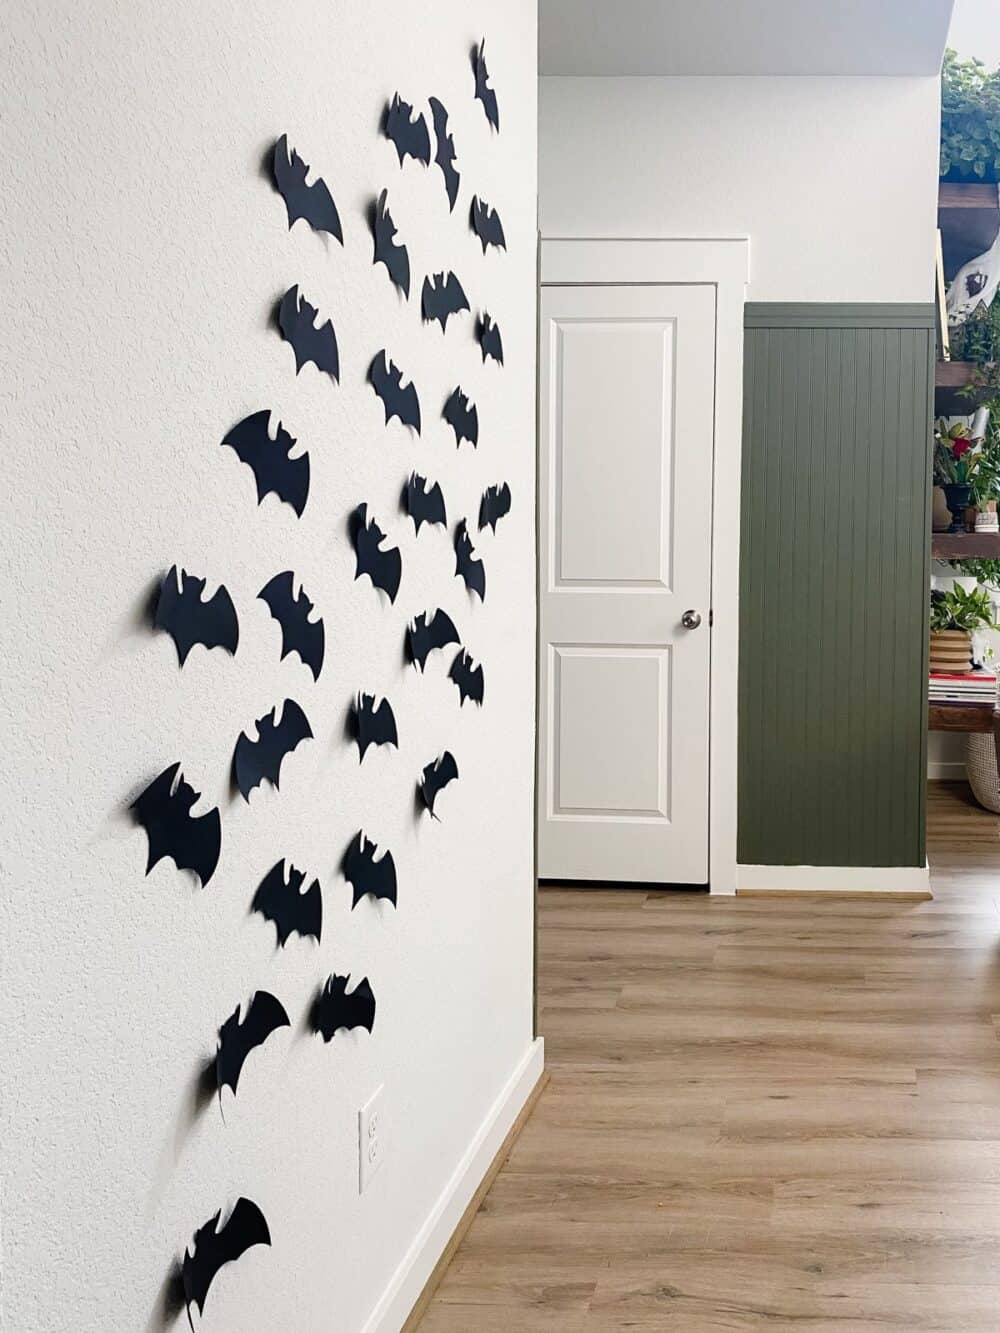 wall with paper bats taped to it for Halloween